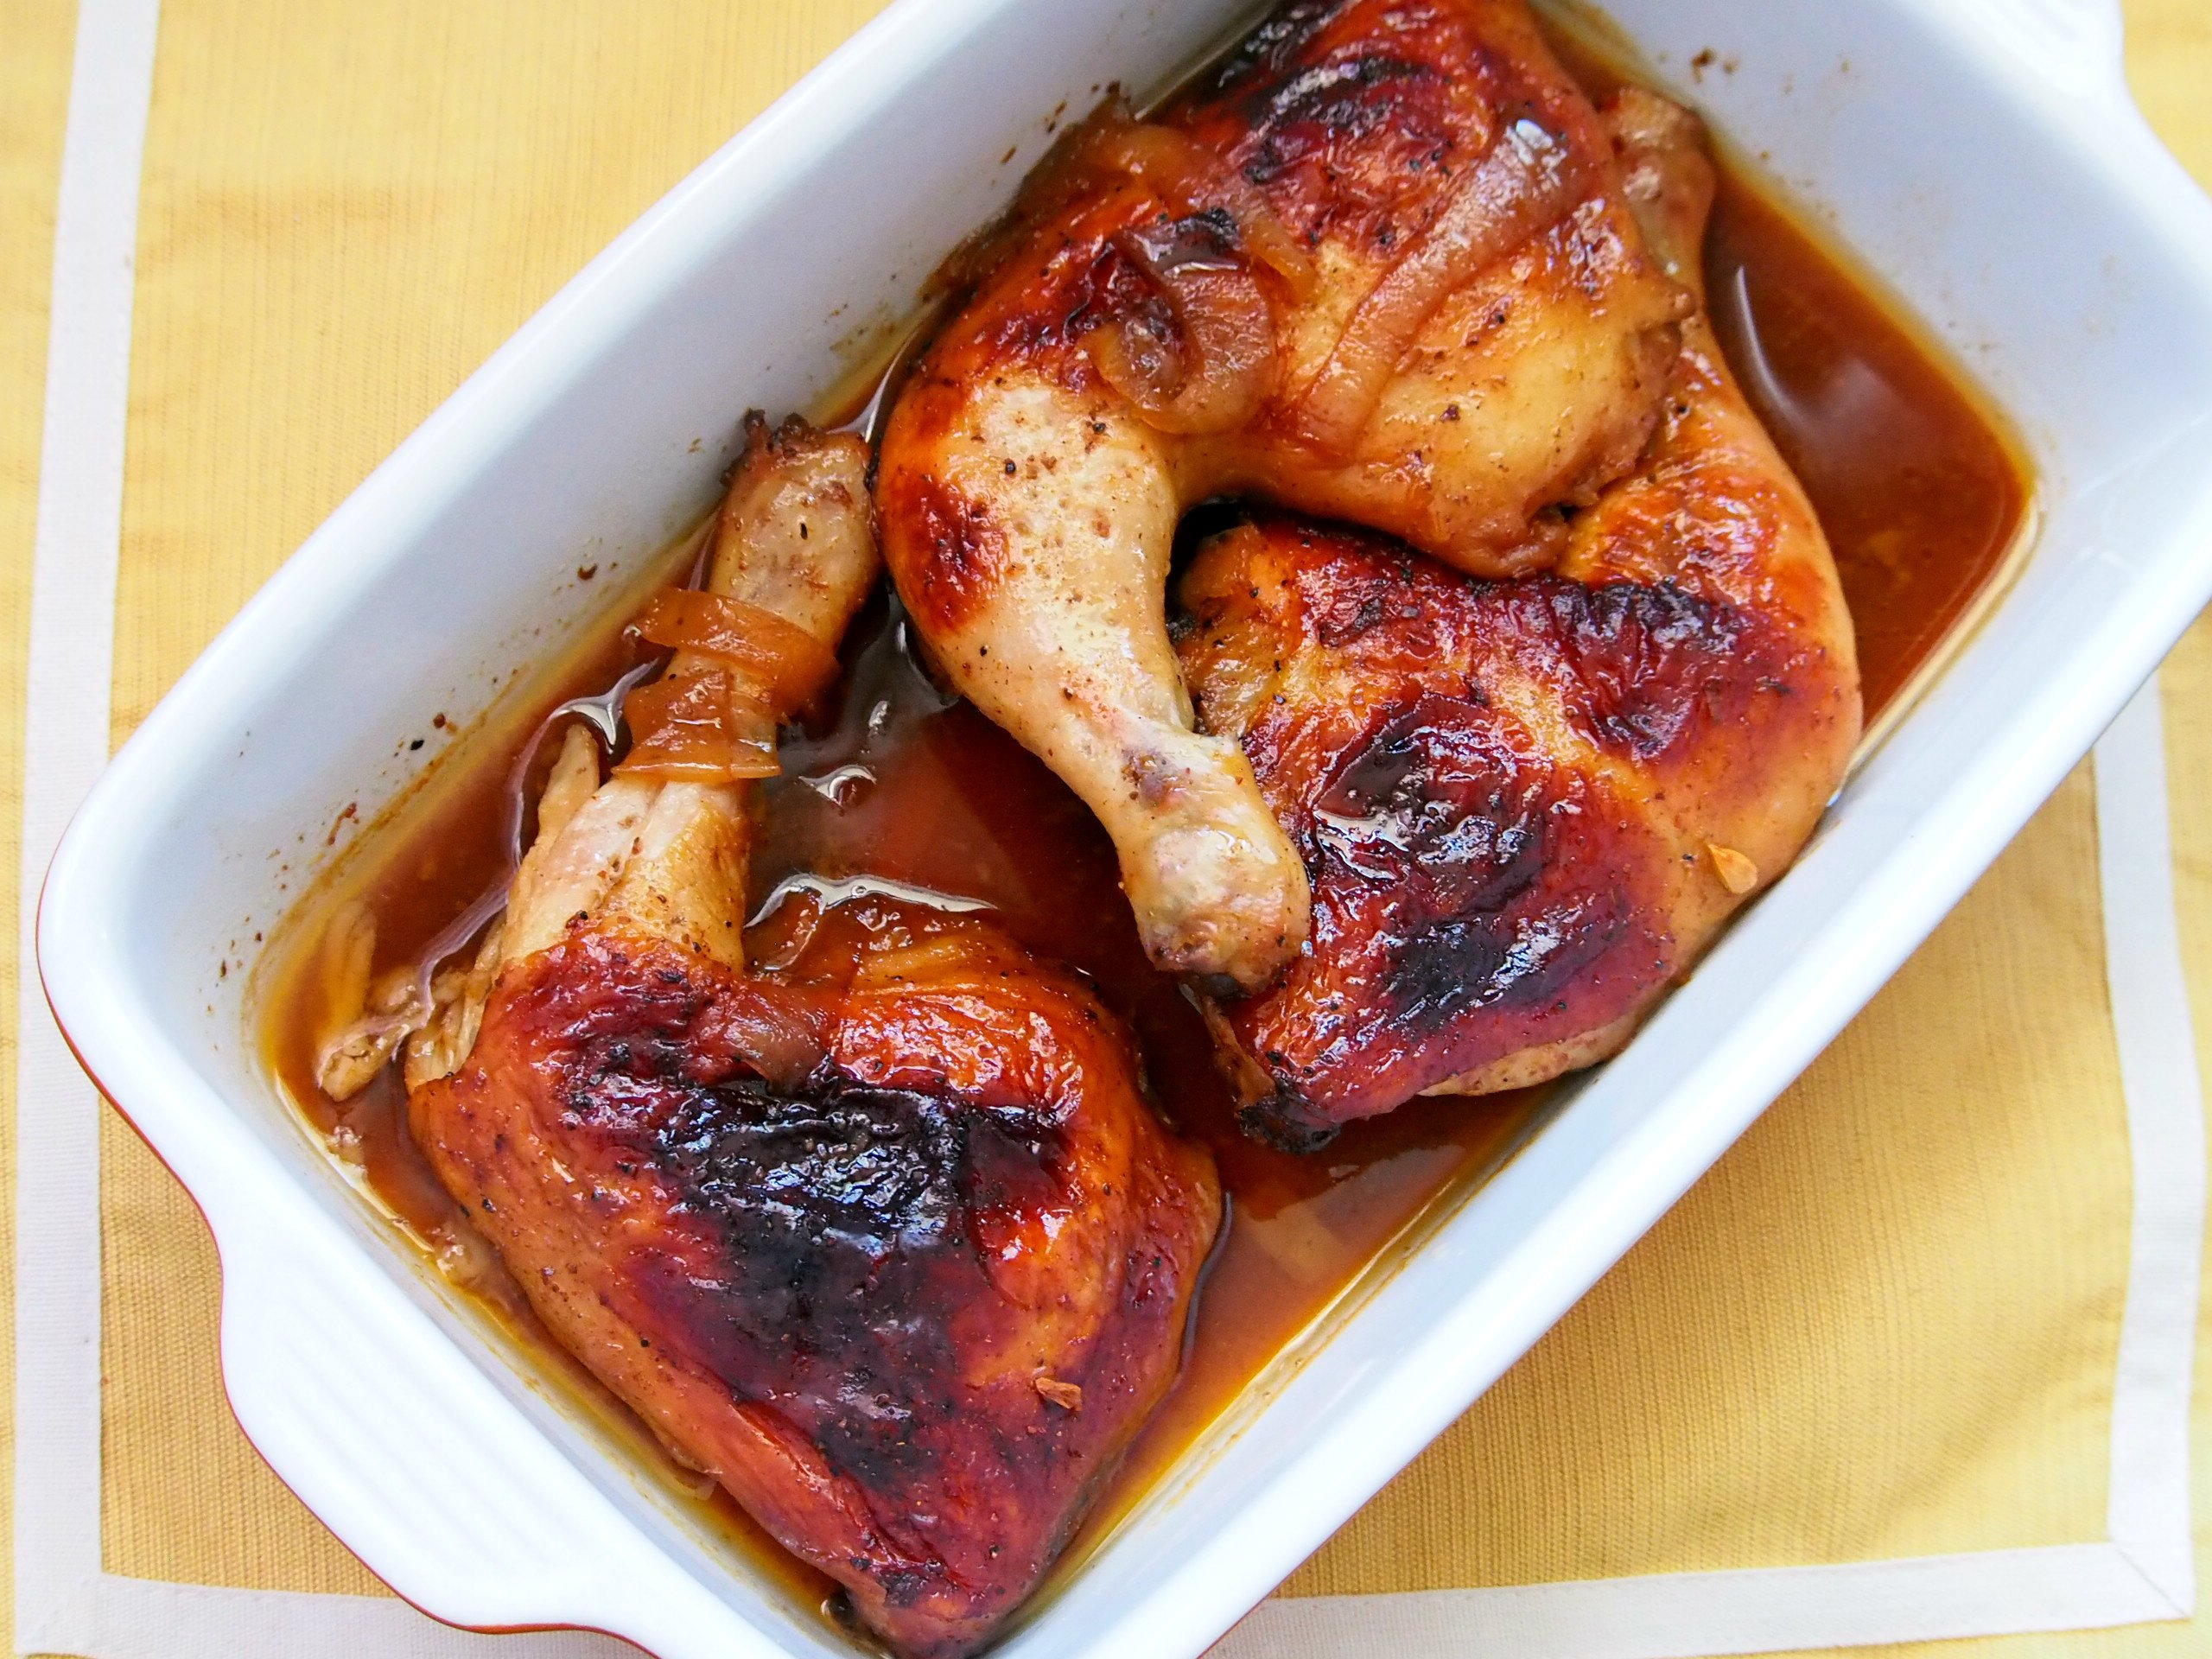 Tasty and saucy BBQ chicken to serve to your family on a weeknight. This is your new no-fail easy dinner recipe!